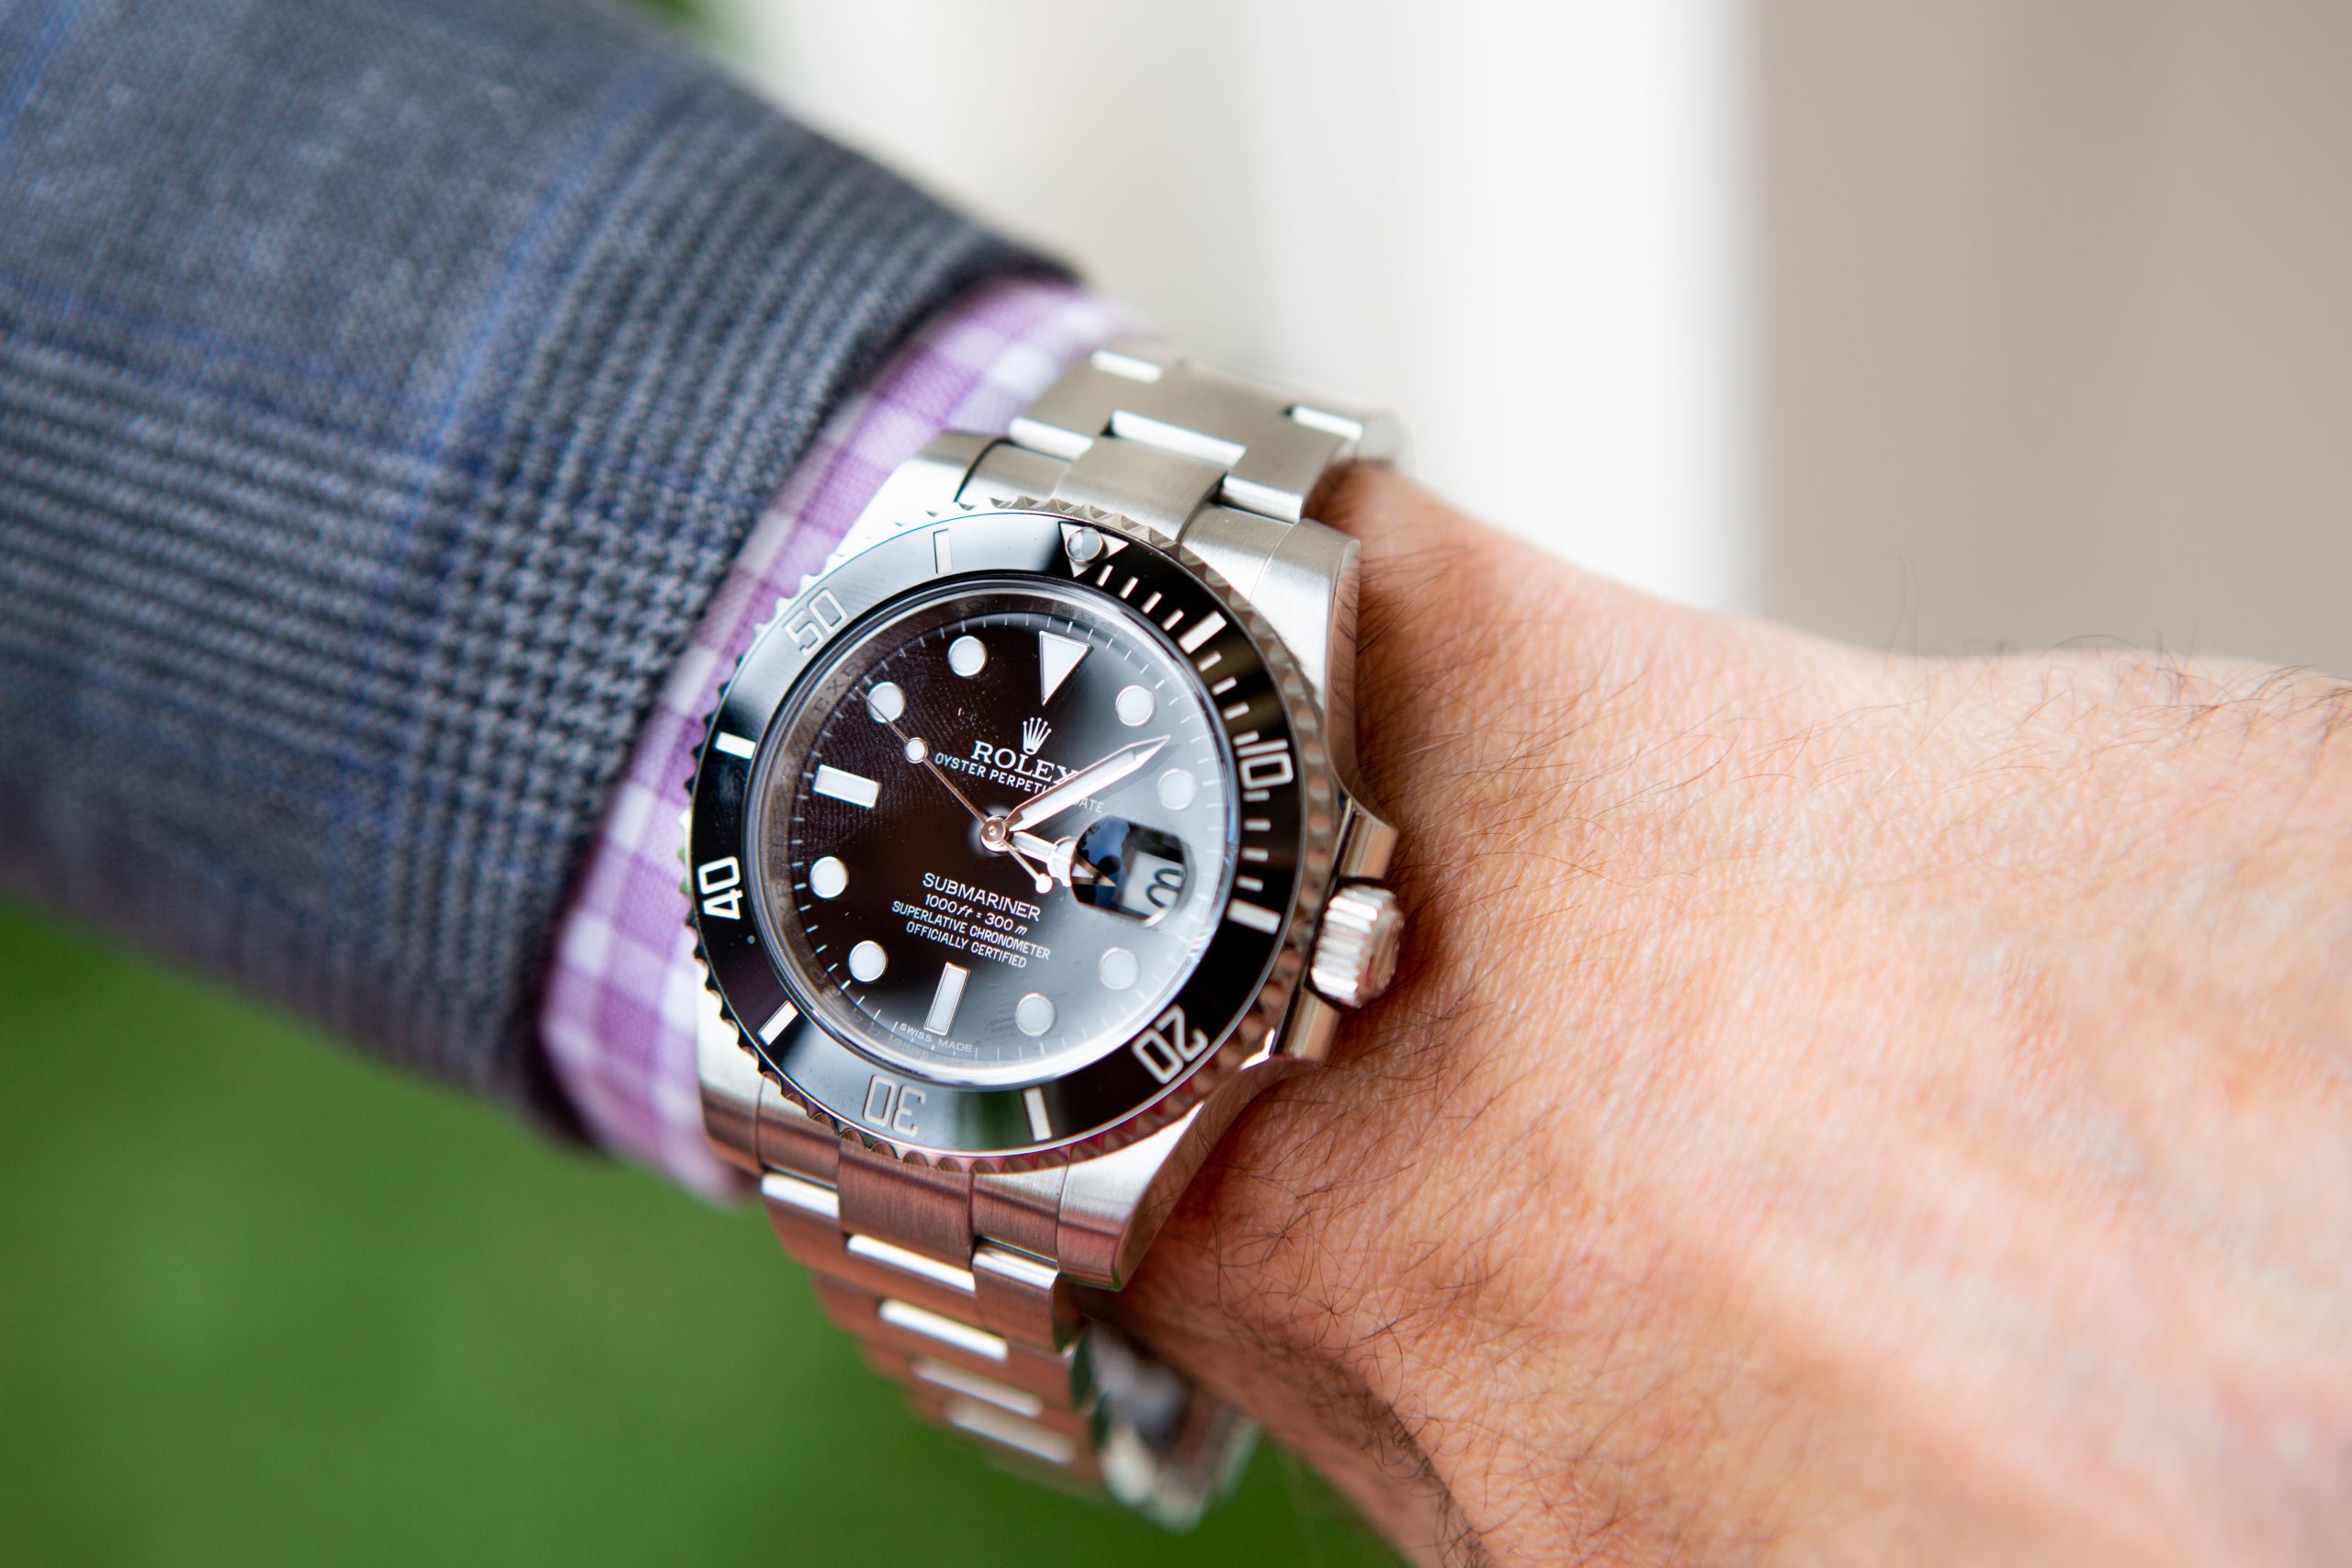 The Rolex Submariner: A Stainless Steel and Ceramic Favorite – Jewelry